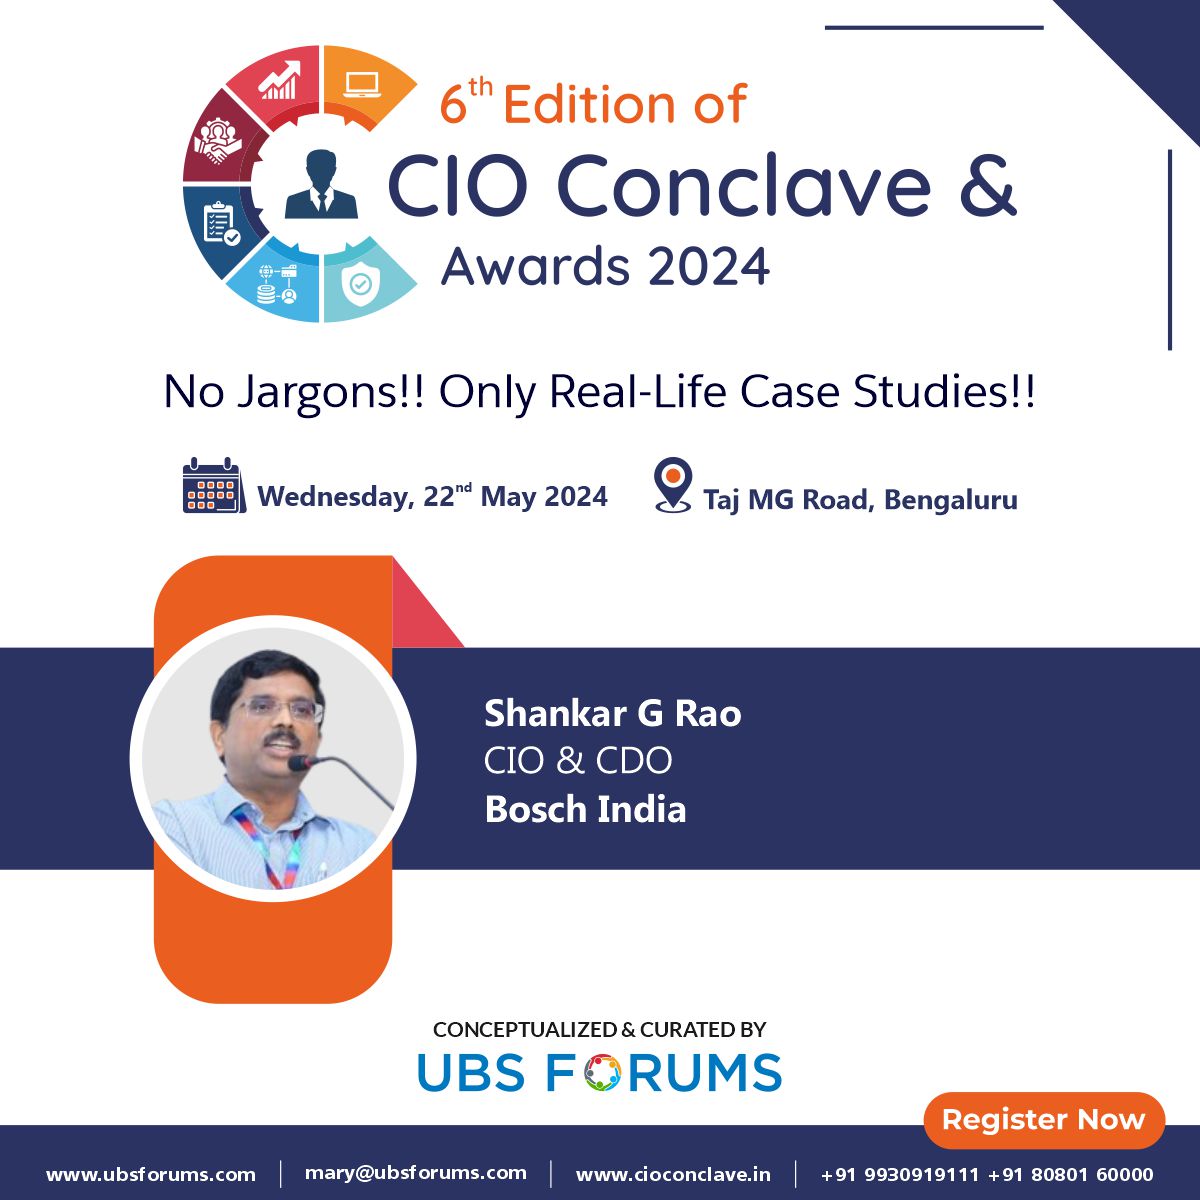 We are delighted to welcome 𝗦𝗵𝗮𝗻𝗸𝗮𝗿 𝗥𝗮𝗼 our eminent speaker for the Exclusive '6th Edition CIO Conclave & Awards 2024.' 🗓️Wednesday, 22nd May 📍Taj MG Road, Bengaluru. Register Now- tinyurl.com/ykp874mw #UBSFCIO #ITLeadership #GenAI #Bosch